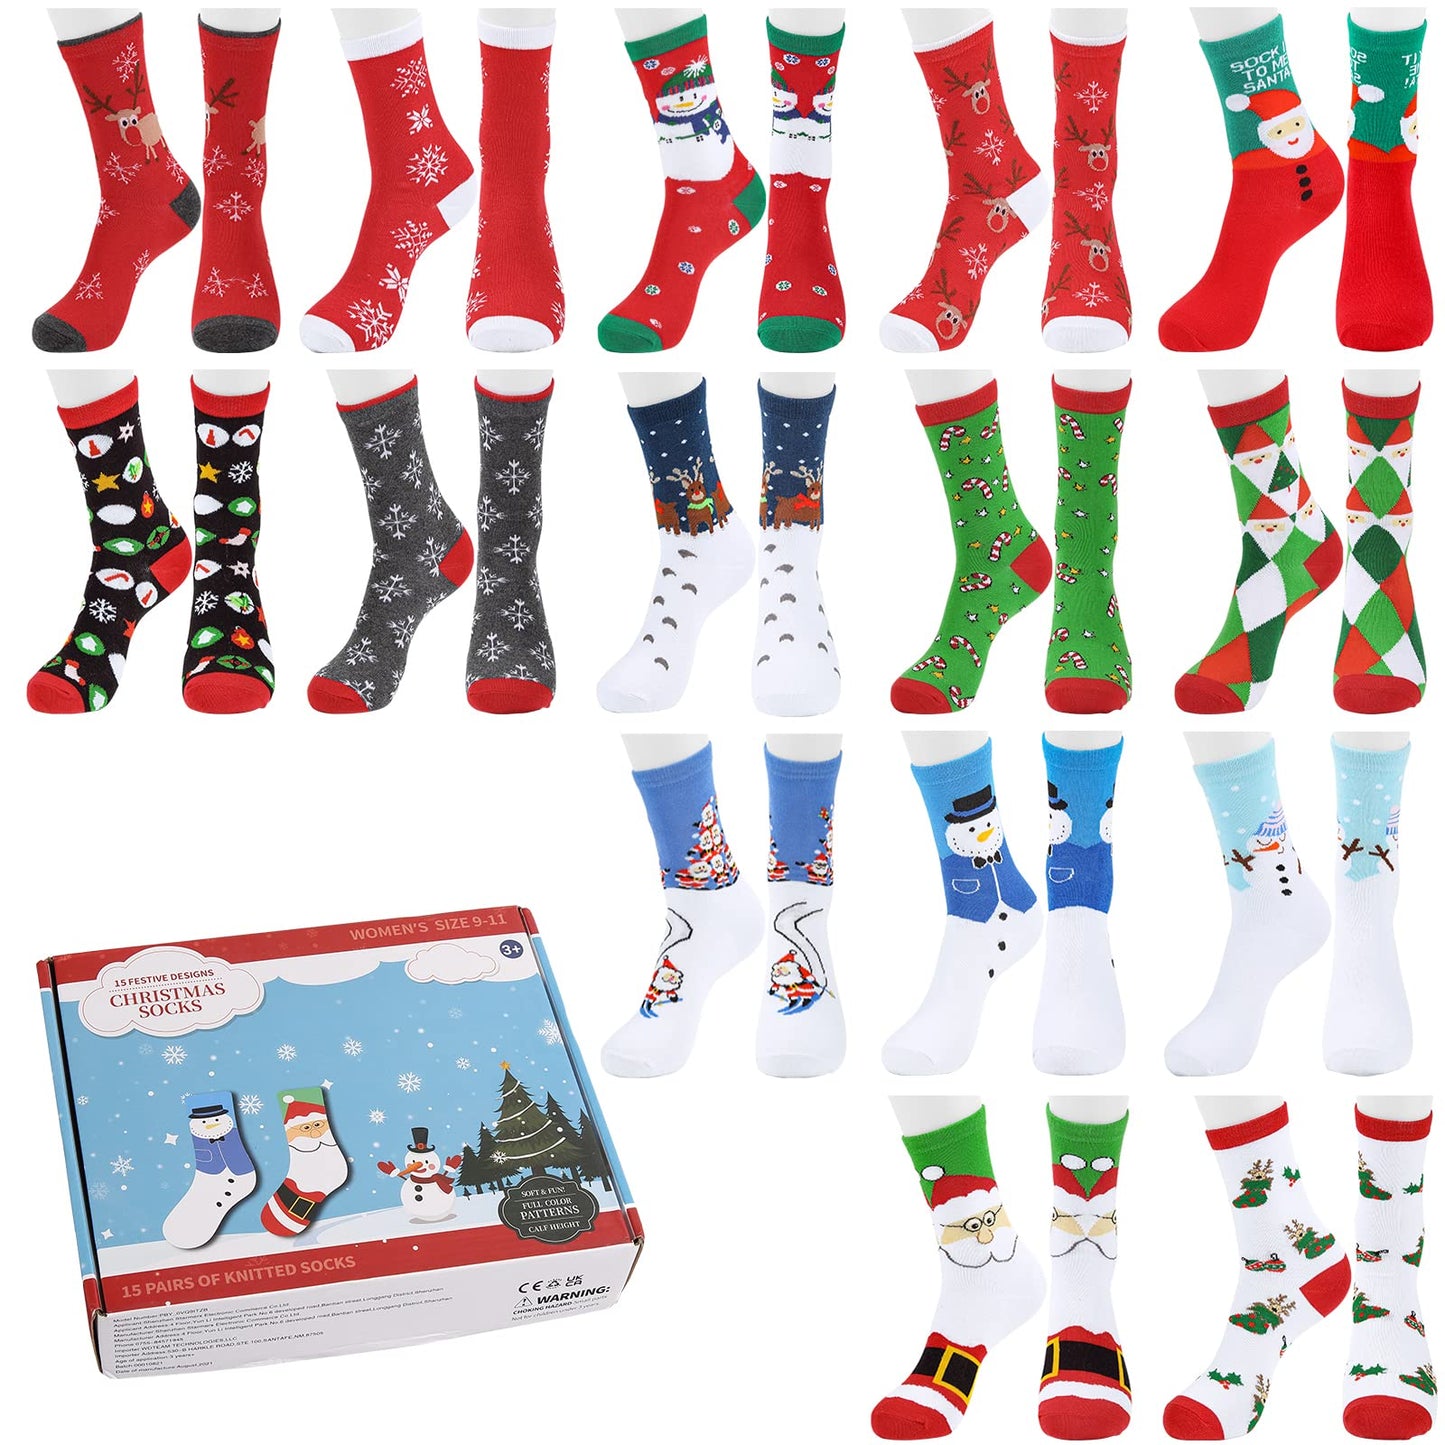 15 Pairs Crew Christmas Holiday Socks隆锚?Cozy Funny Cotton Knit Xmas Soft Socks,Colorful Festive Design for Man Woman Girls Winter Novelty Christmas Gifts with Gift Box